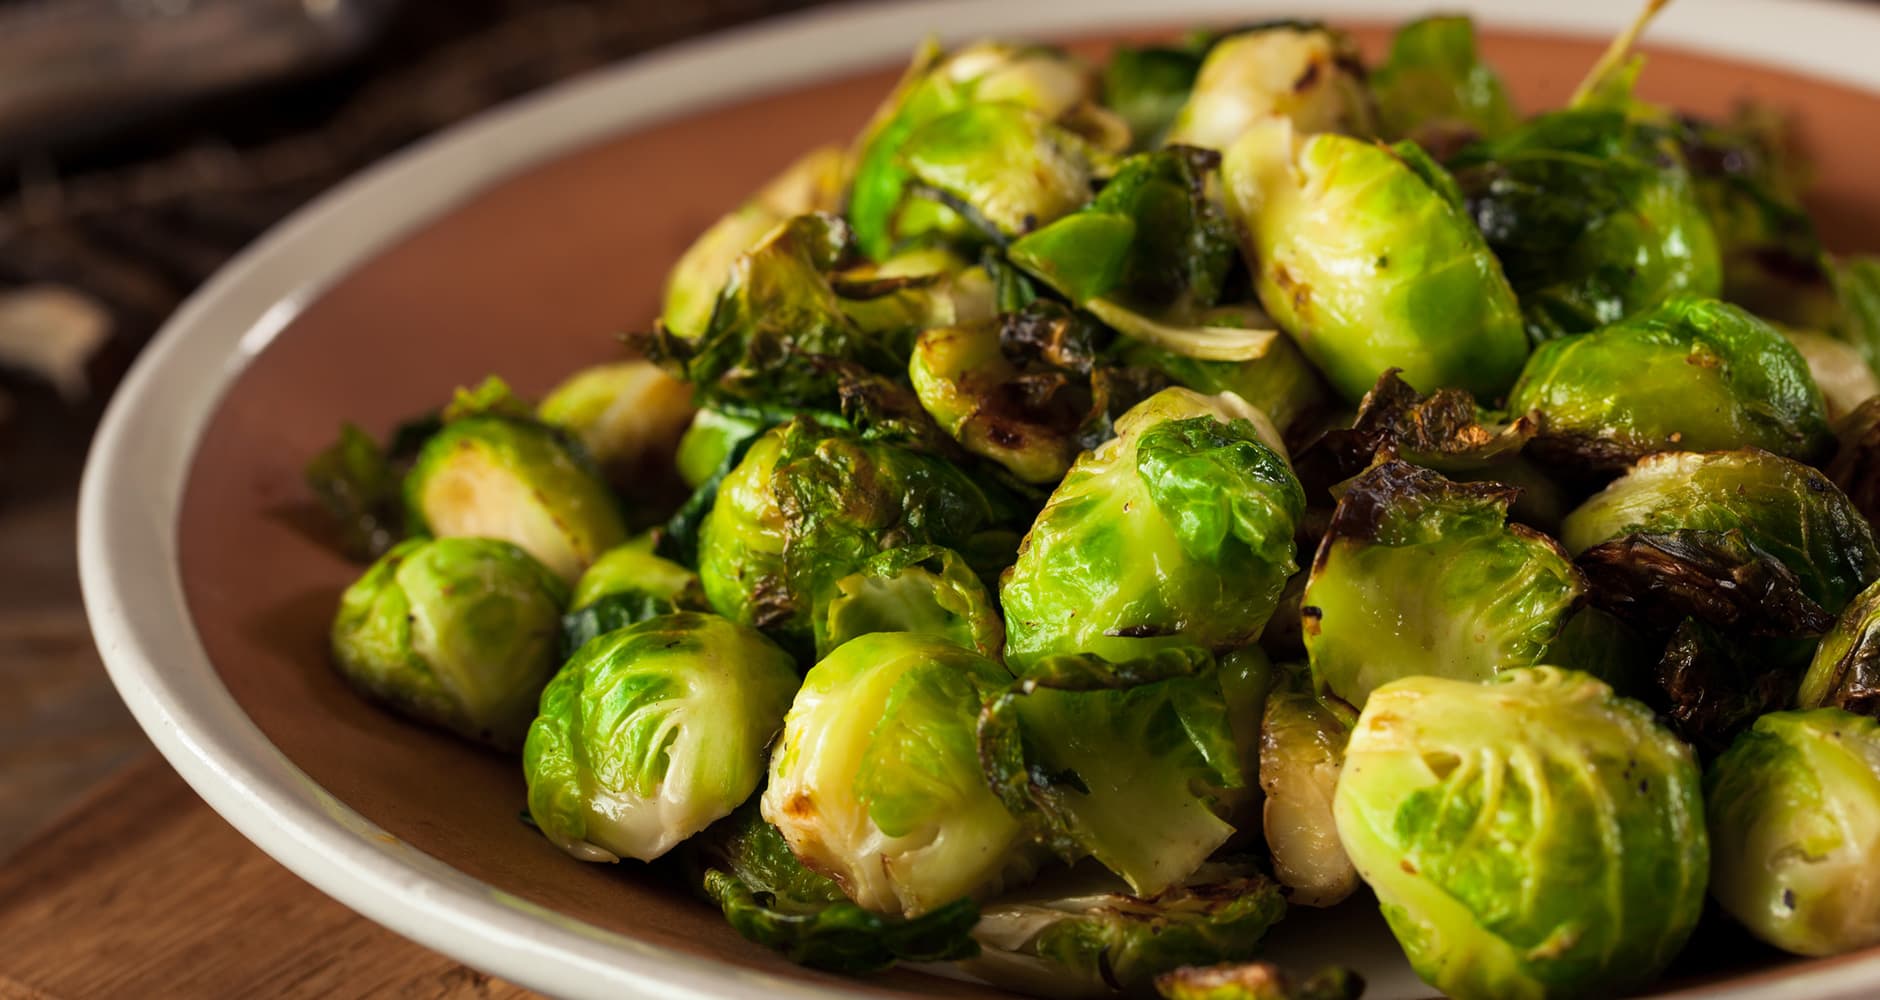 Brussels sprouts taste great with a little bit of balsamic vinegar. After growing and harvesting your own, try our recipe!